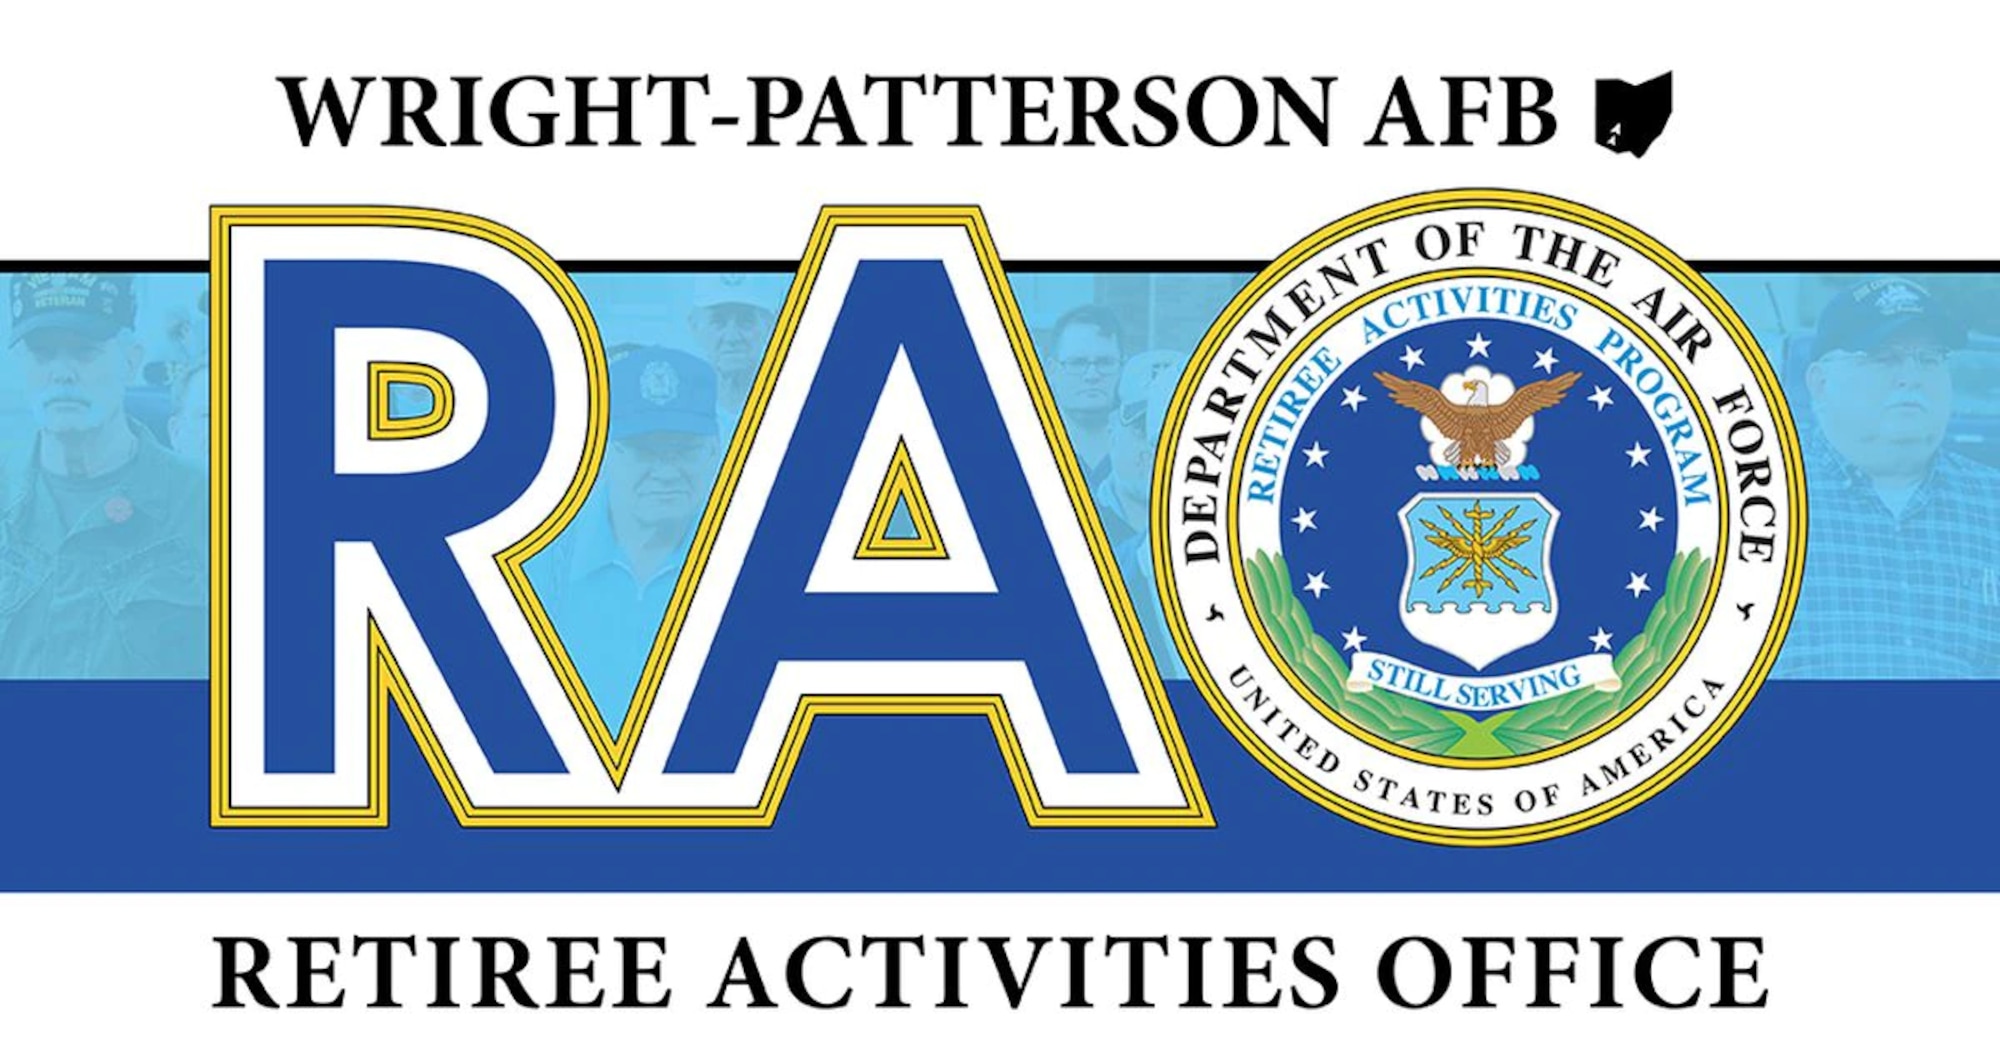 Graphic for Wright-Patterson Air Force Base Retiree Activities Office (U.S. Air Force graphic by David Clingerman)